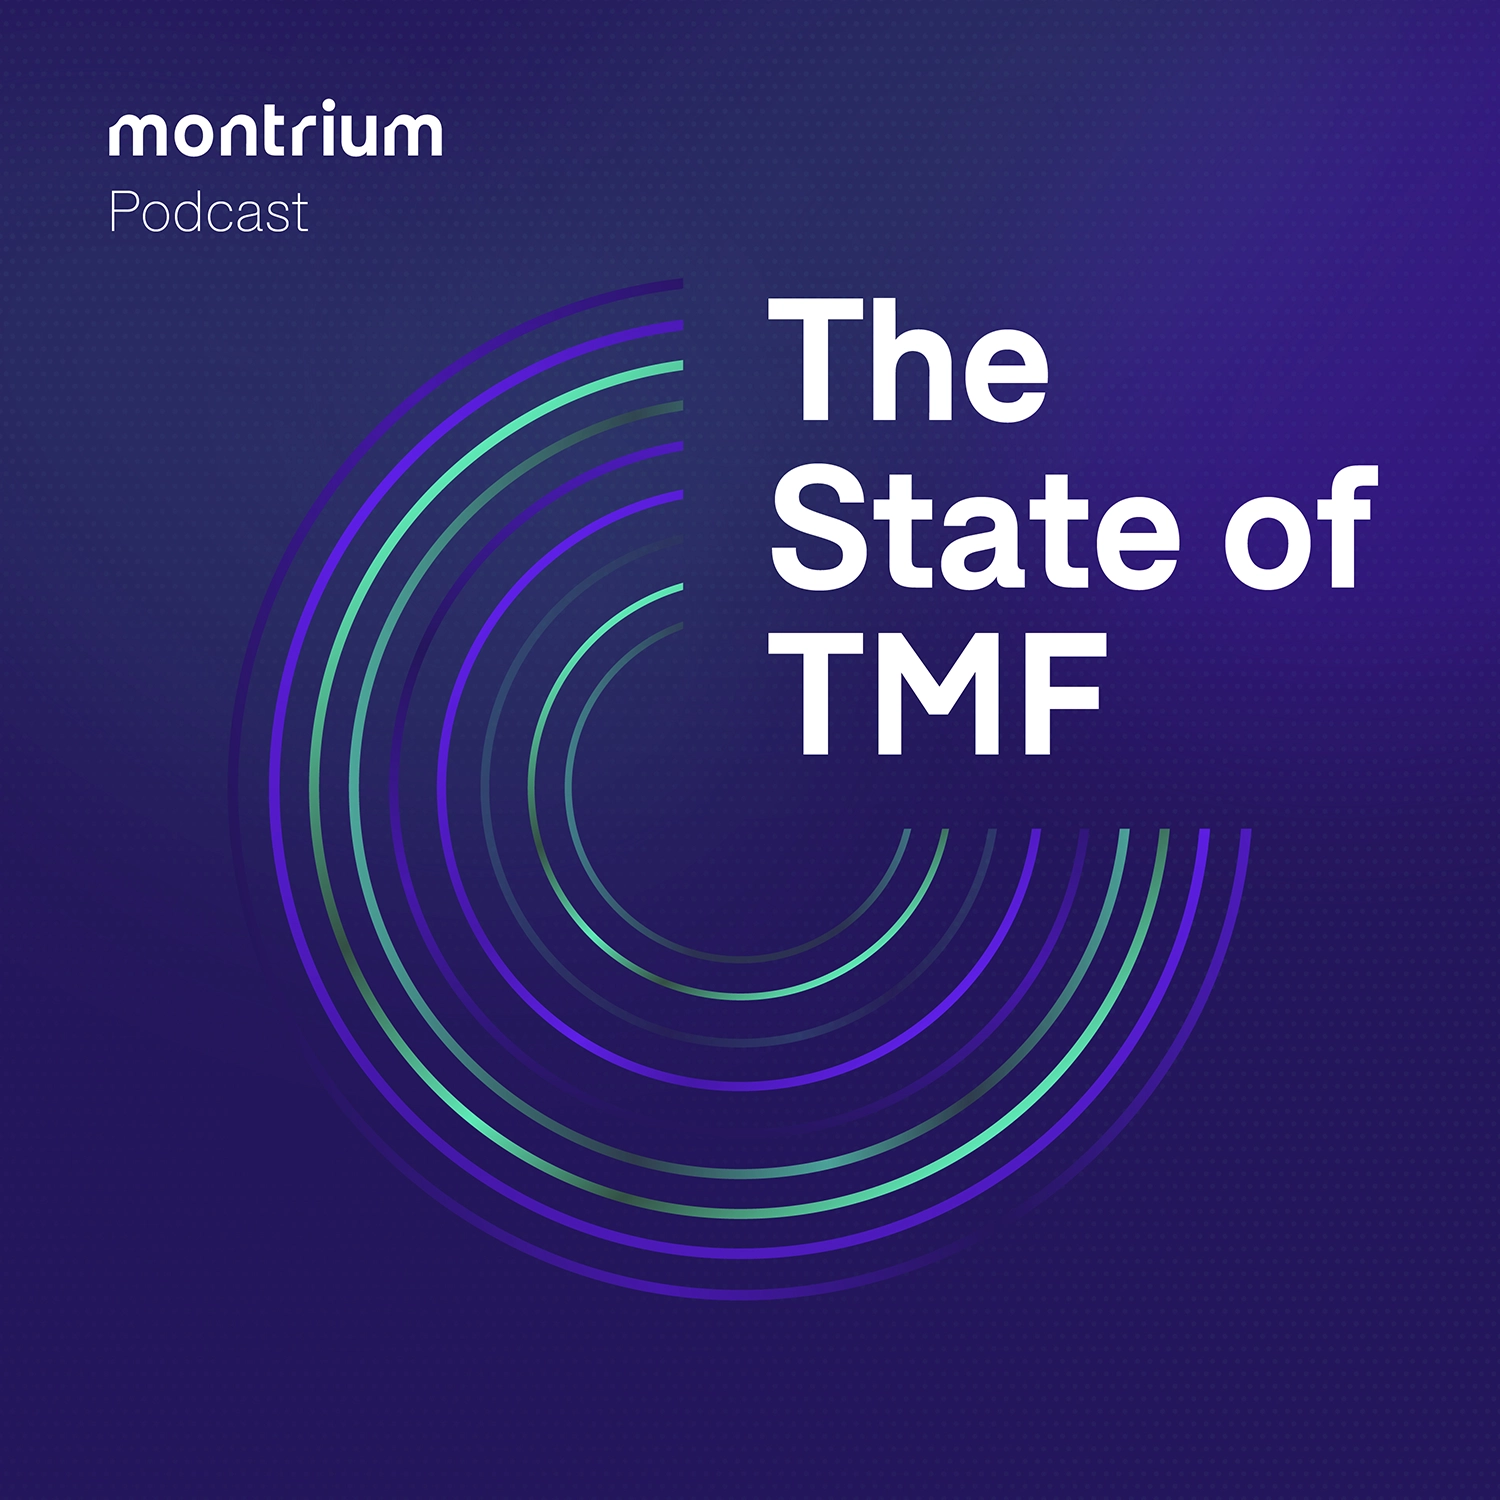 The State of TMF Live and Podcast